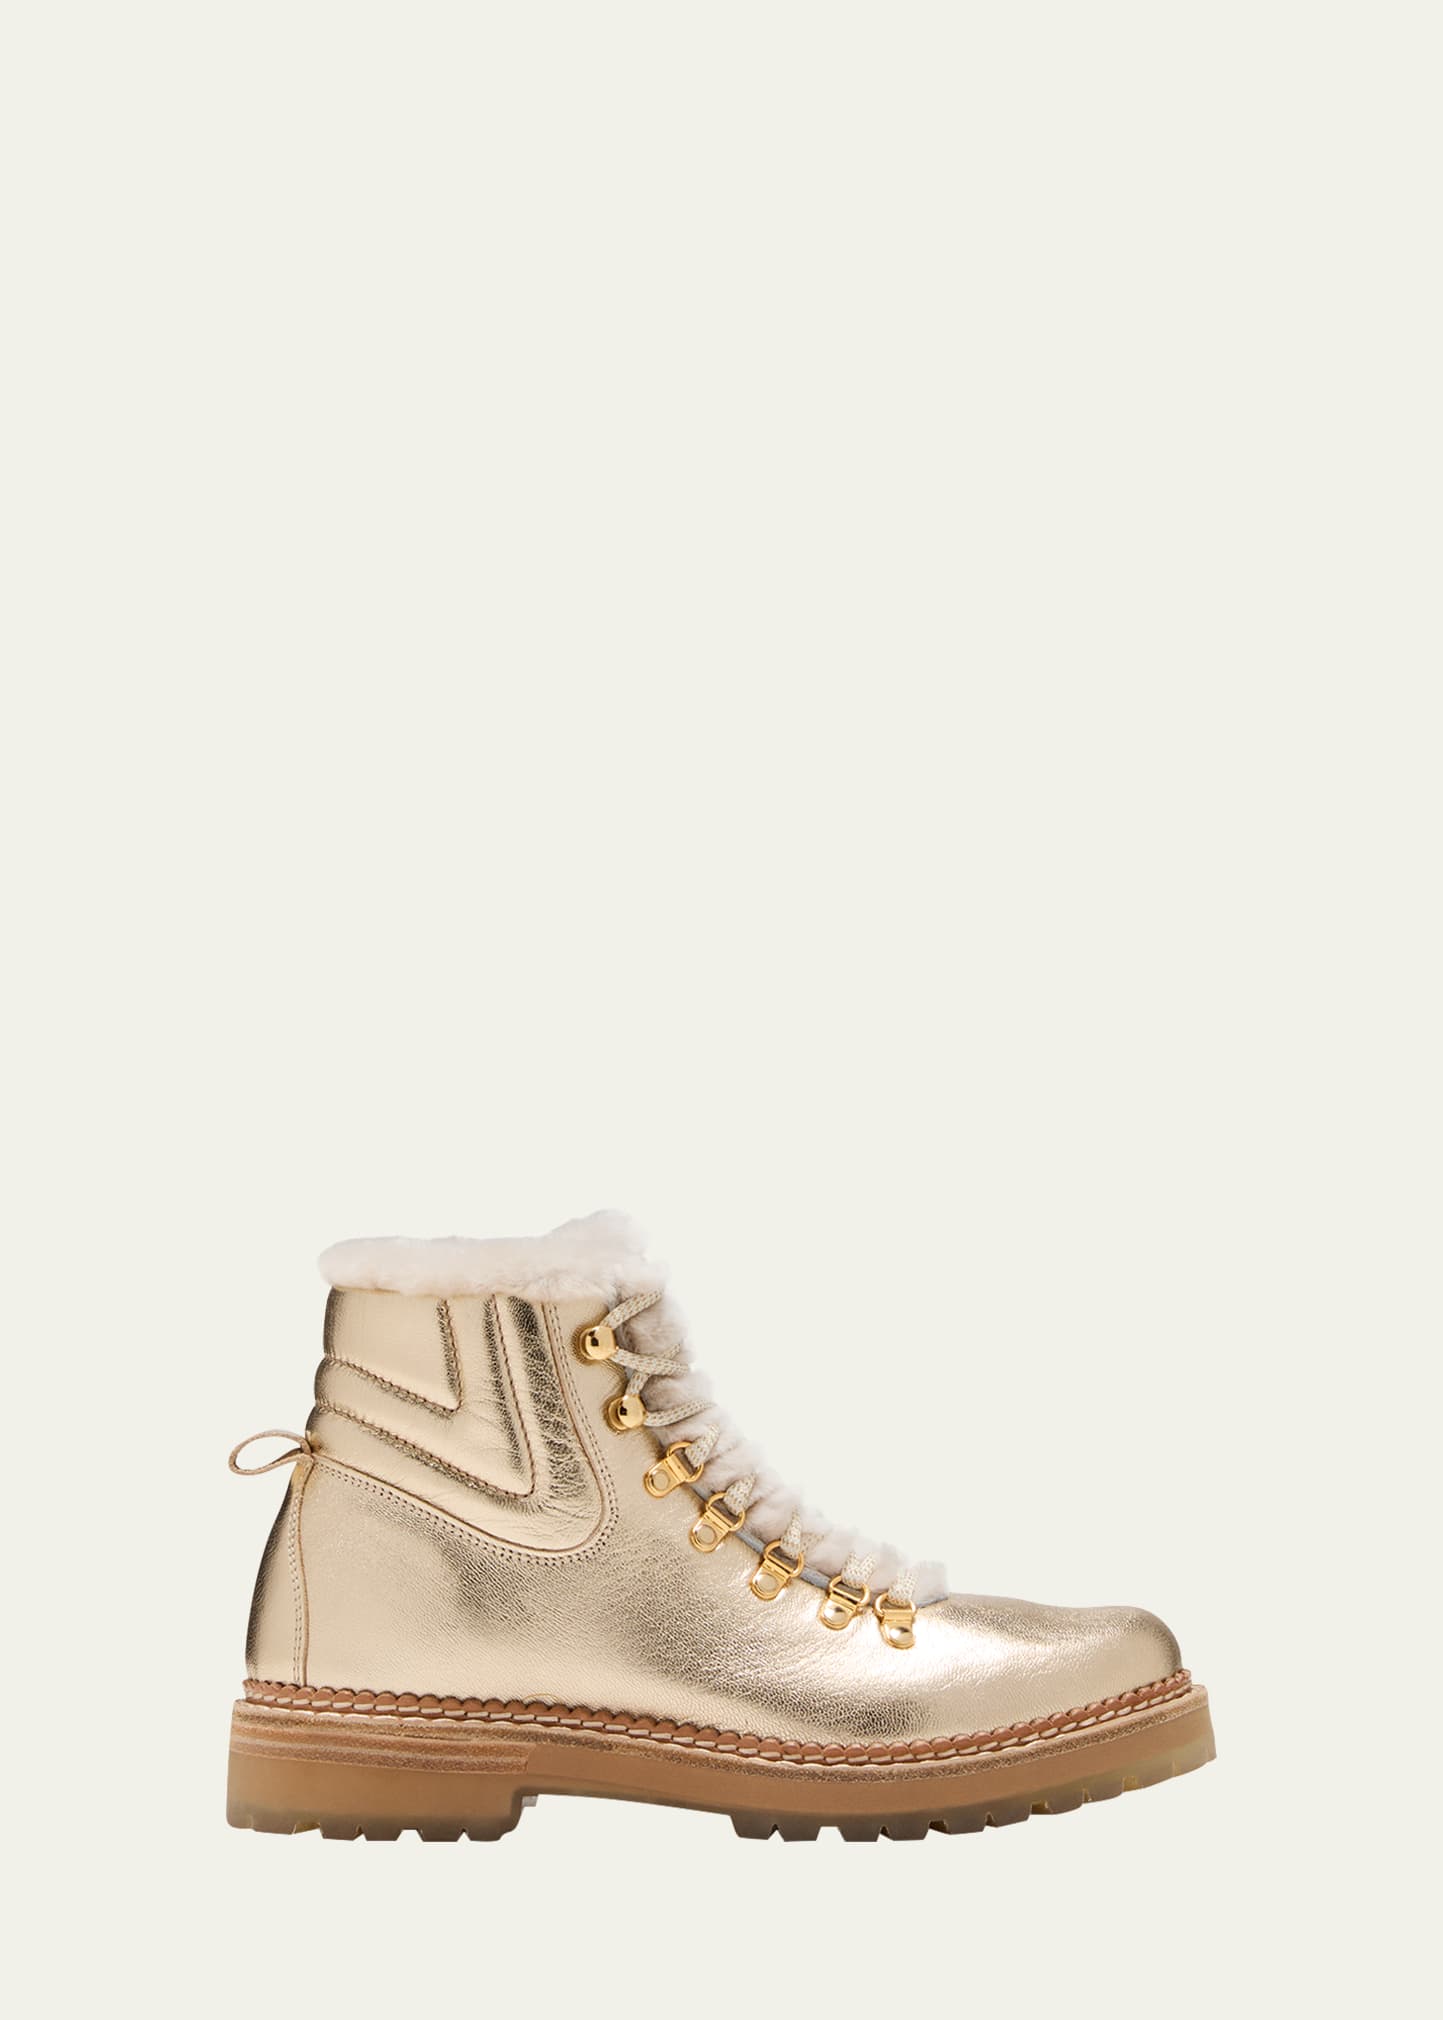 Metallic Leather Shearling-Lined Hiking Boots